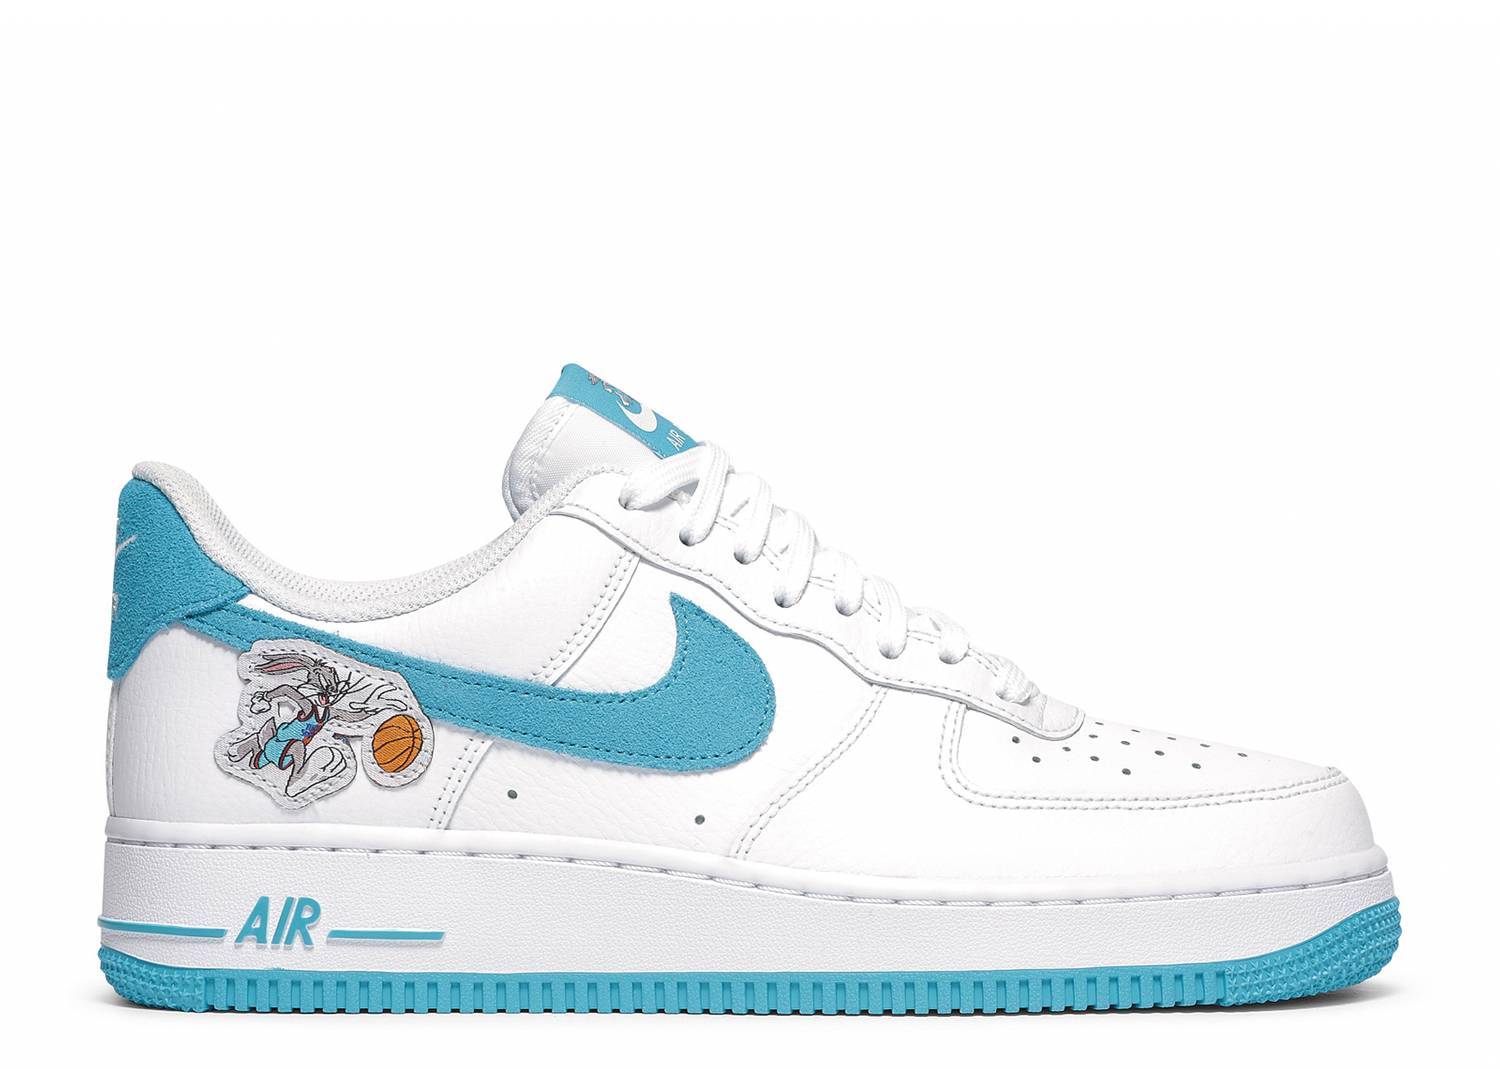 NIKE AIR FORCE 1 LOW “HARE SPACE JAM”